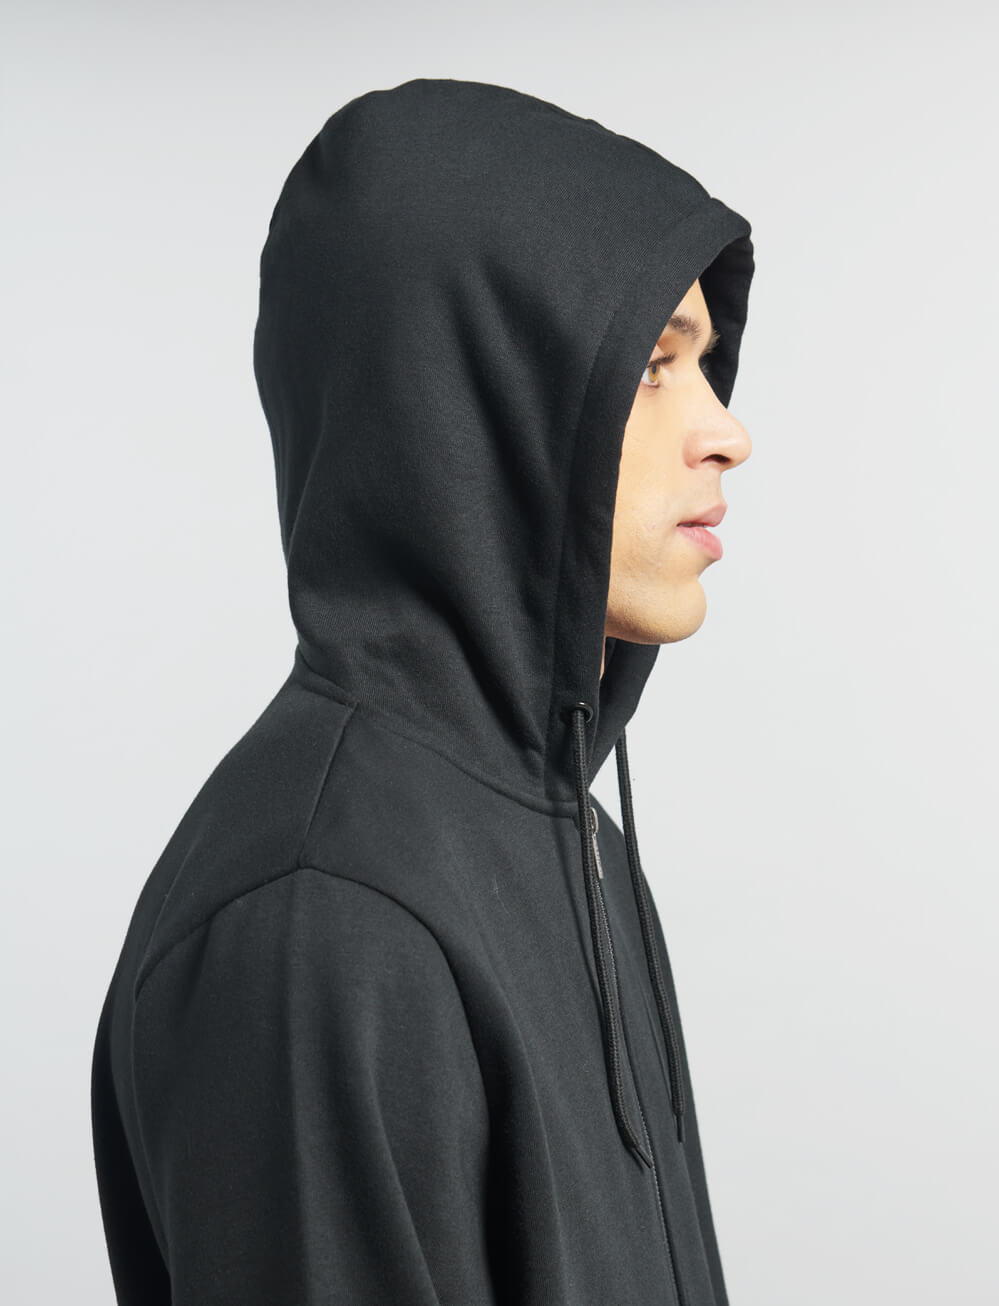 Official Arsenal Full Zip Hoodie - Black - The World Football Store